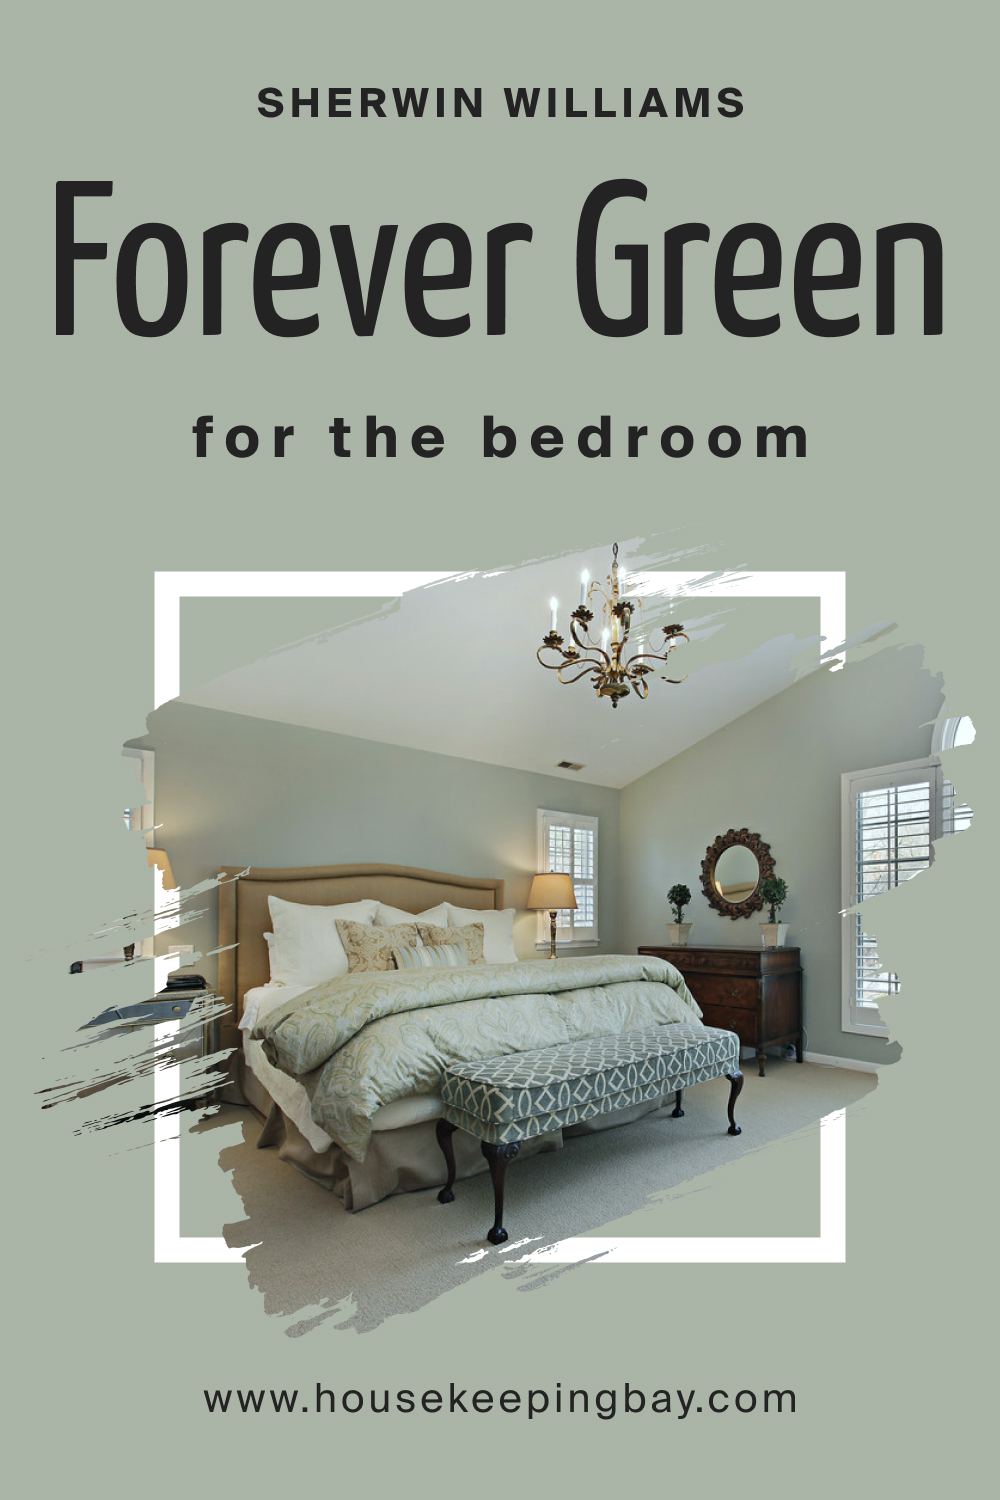 Sherwin Williams. SW 9653 Forever Green For the bedroom